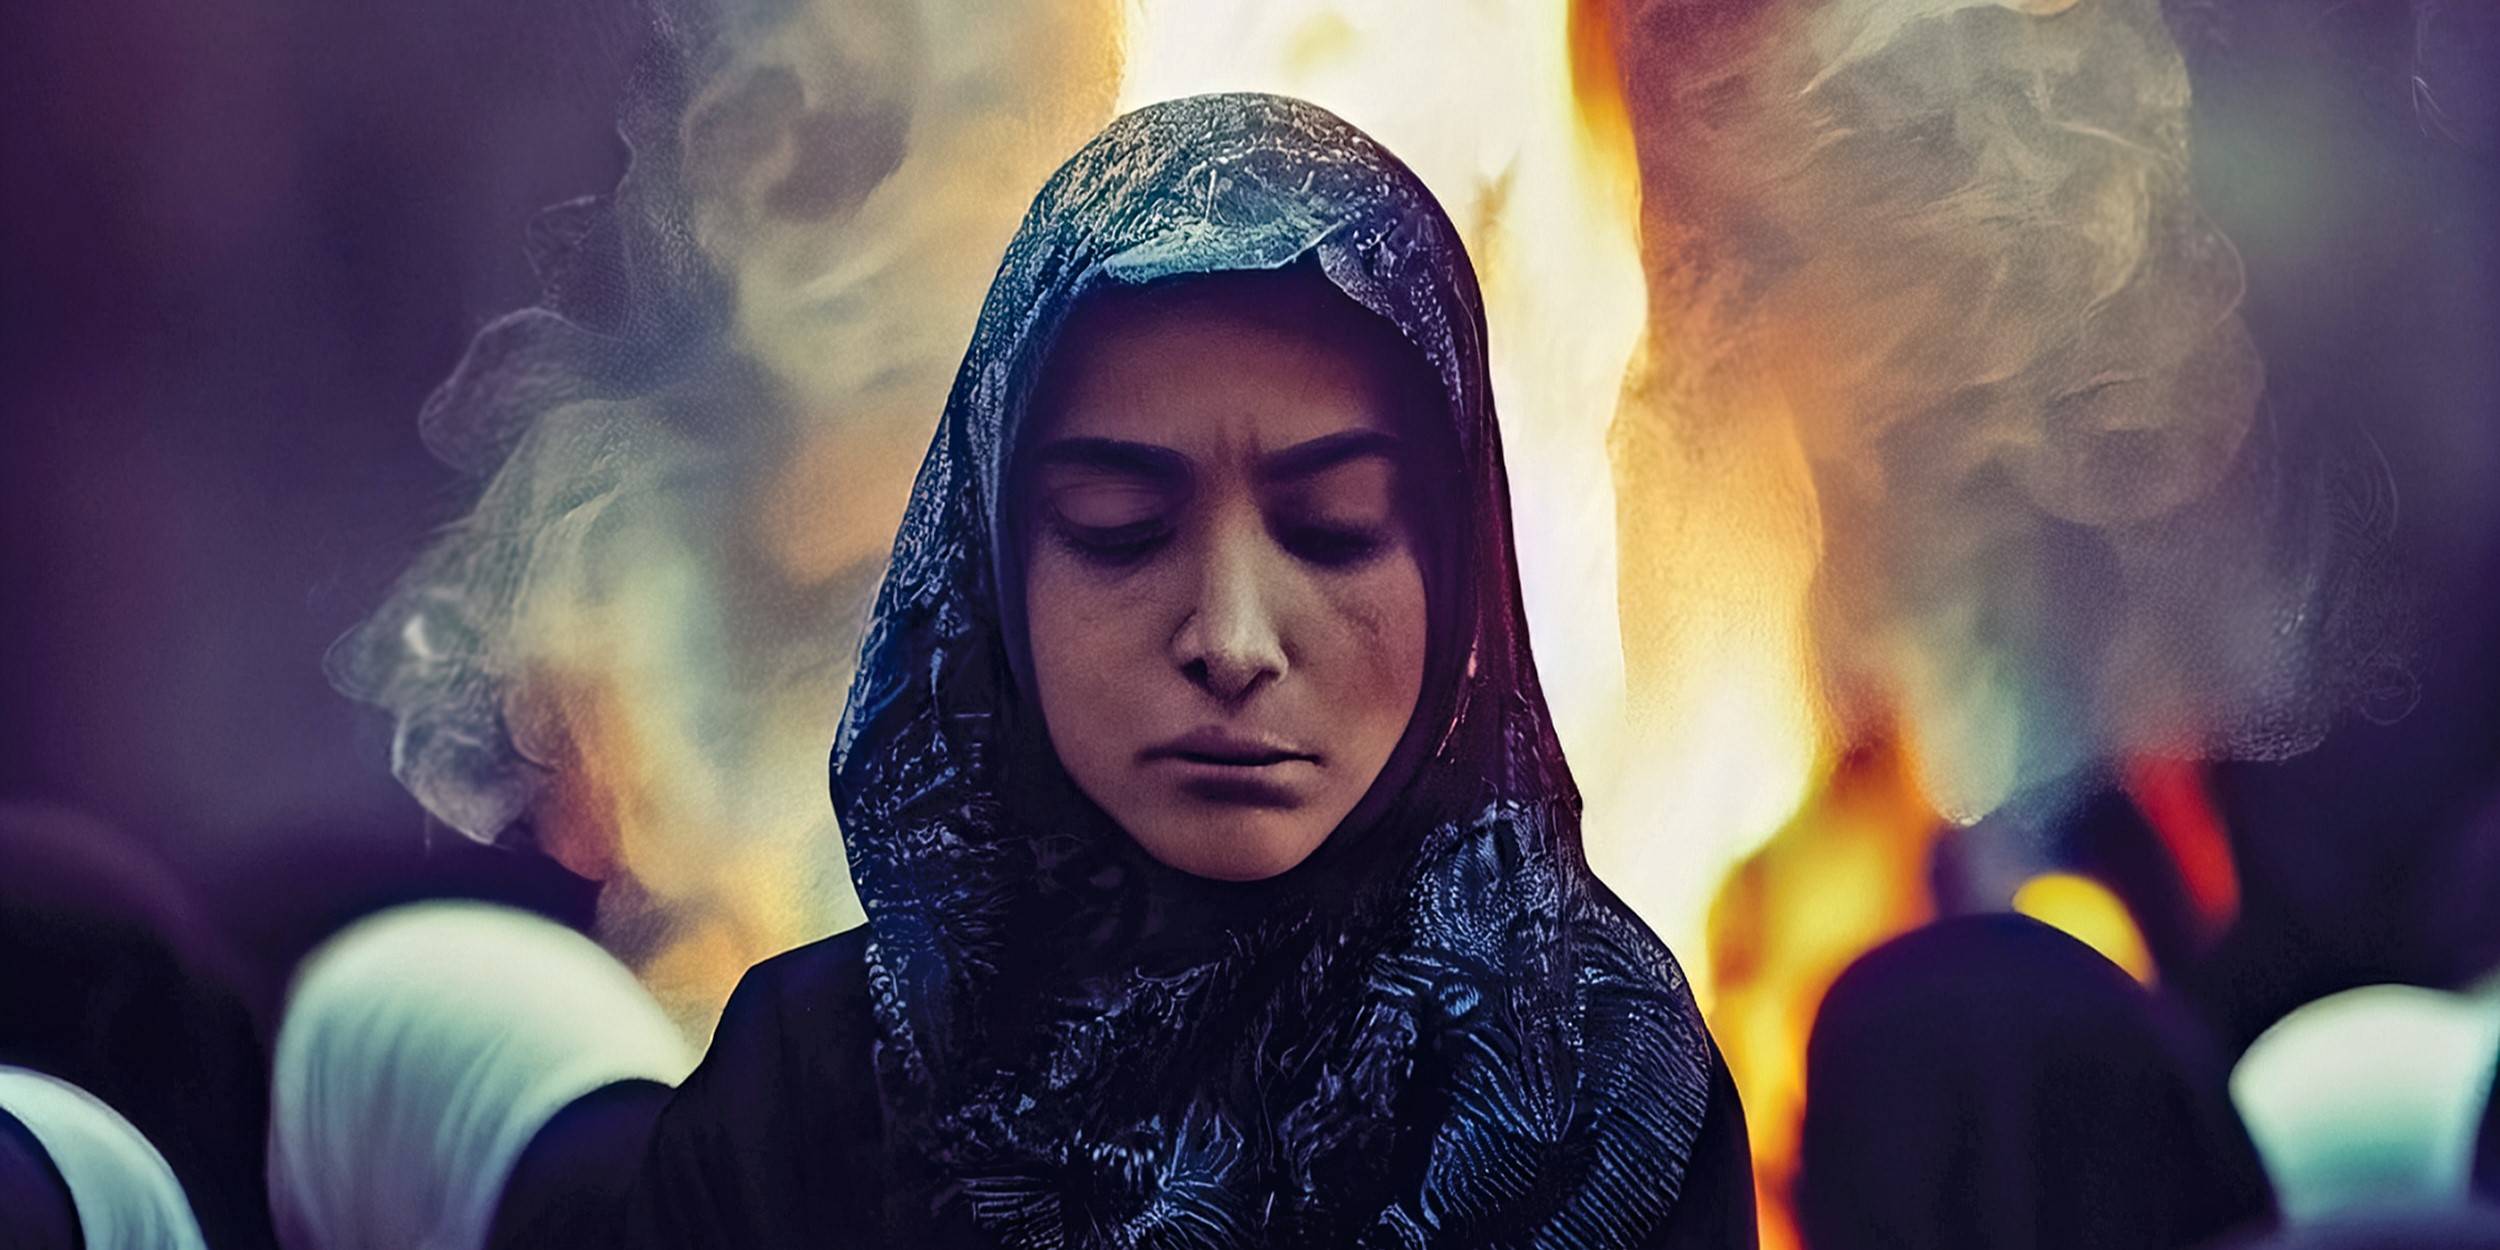 3d rendering of woman in Iran wearing a hijab with fire in the background, protesting in the streets, fighting for women's rights